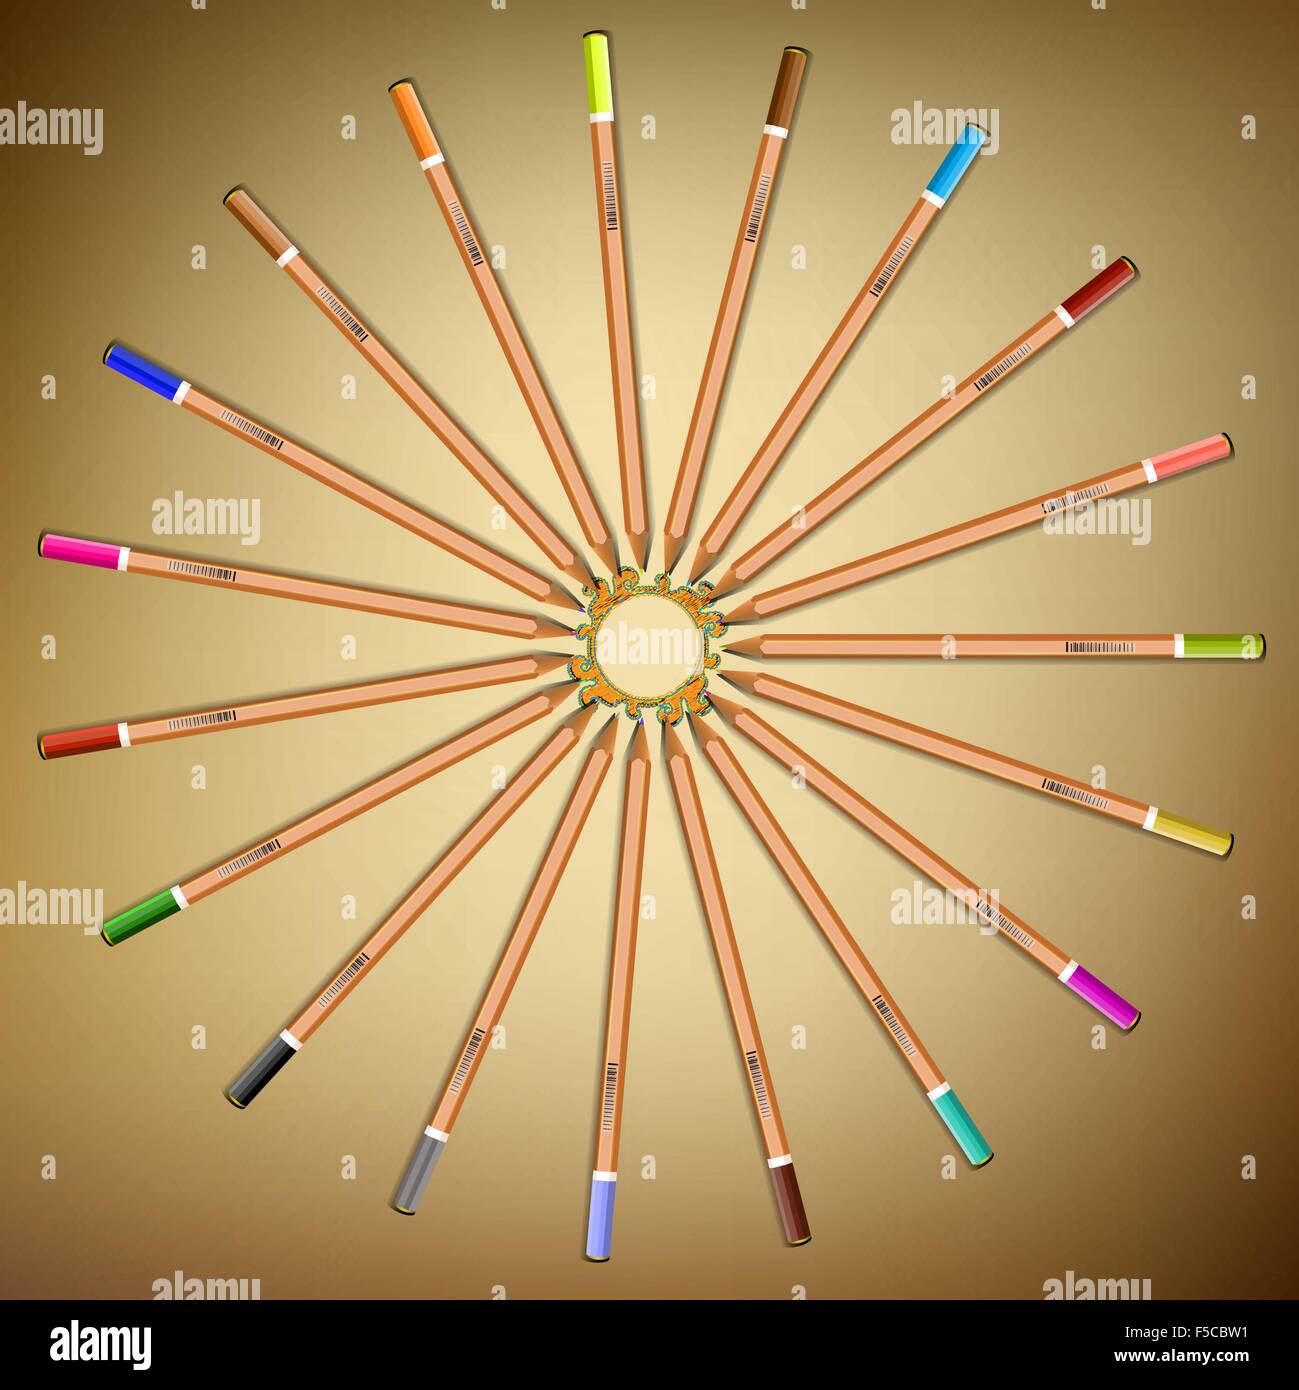 Multi-colored pencils laid out in a circle on the paper.Vector Stock Vector